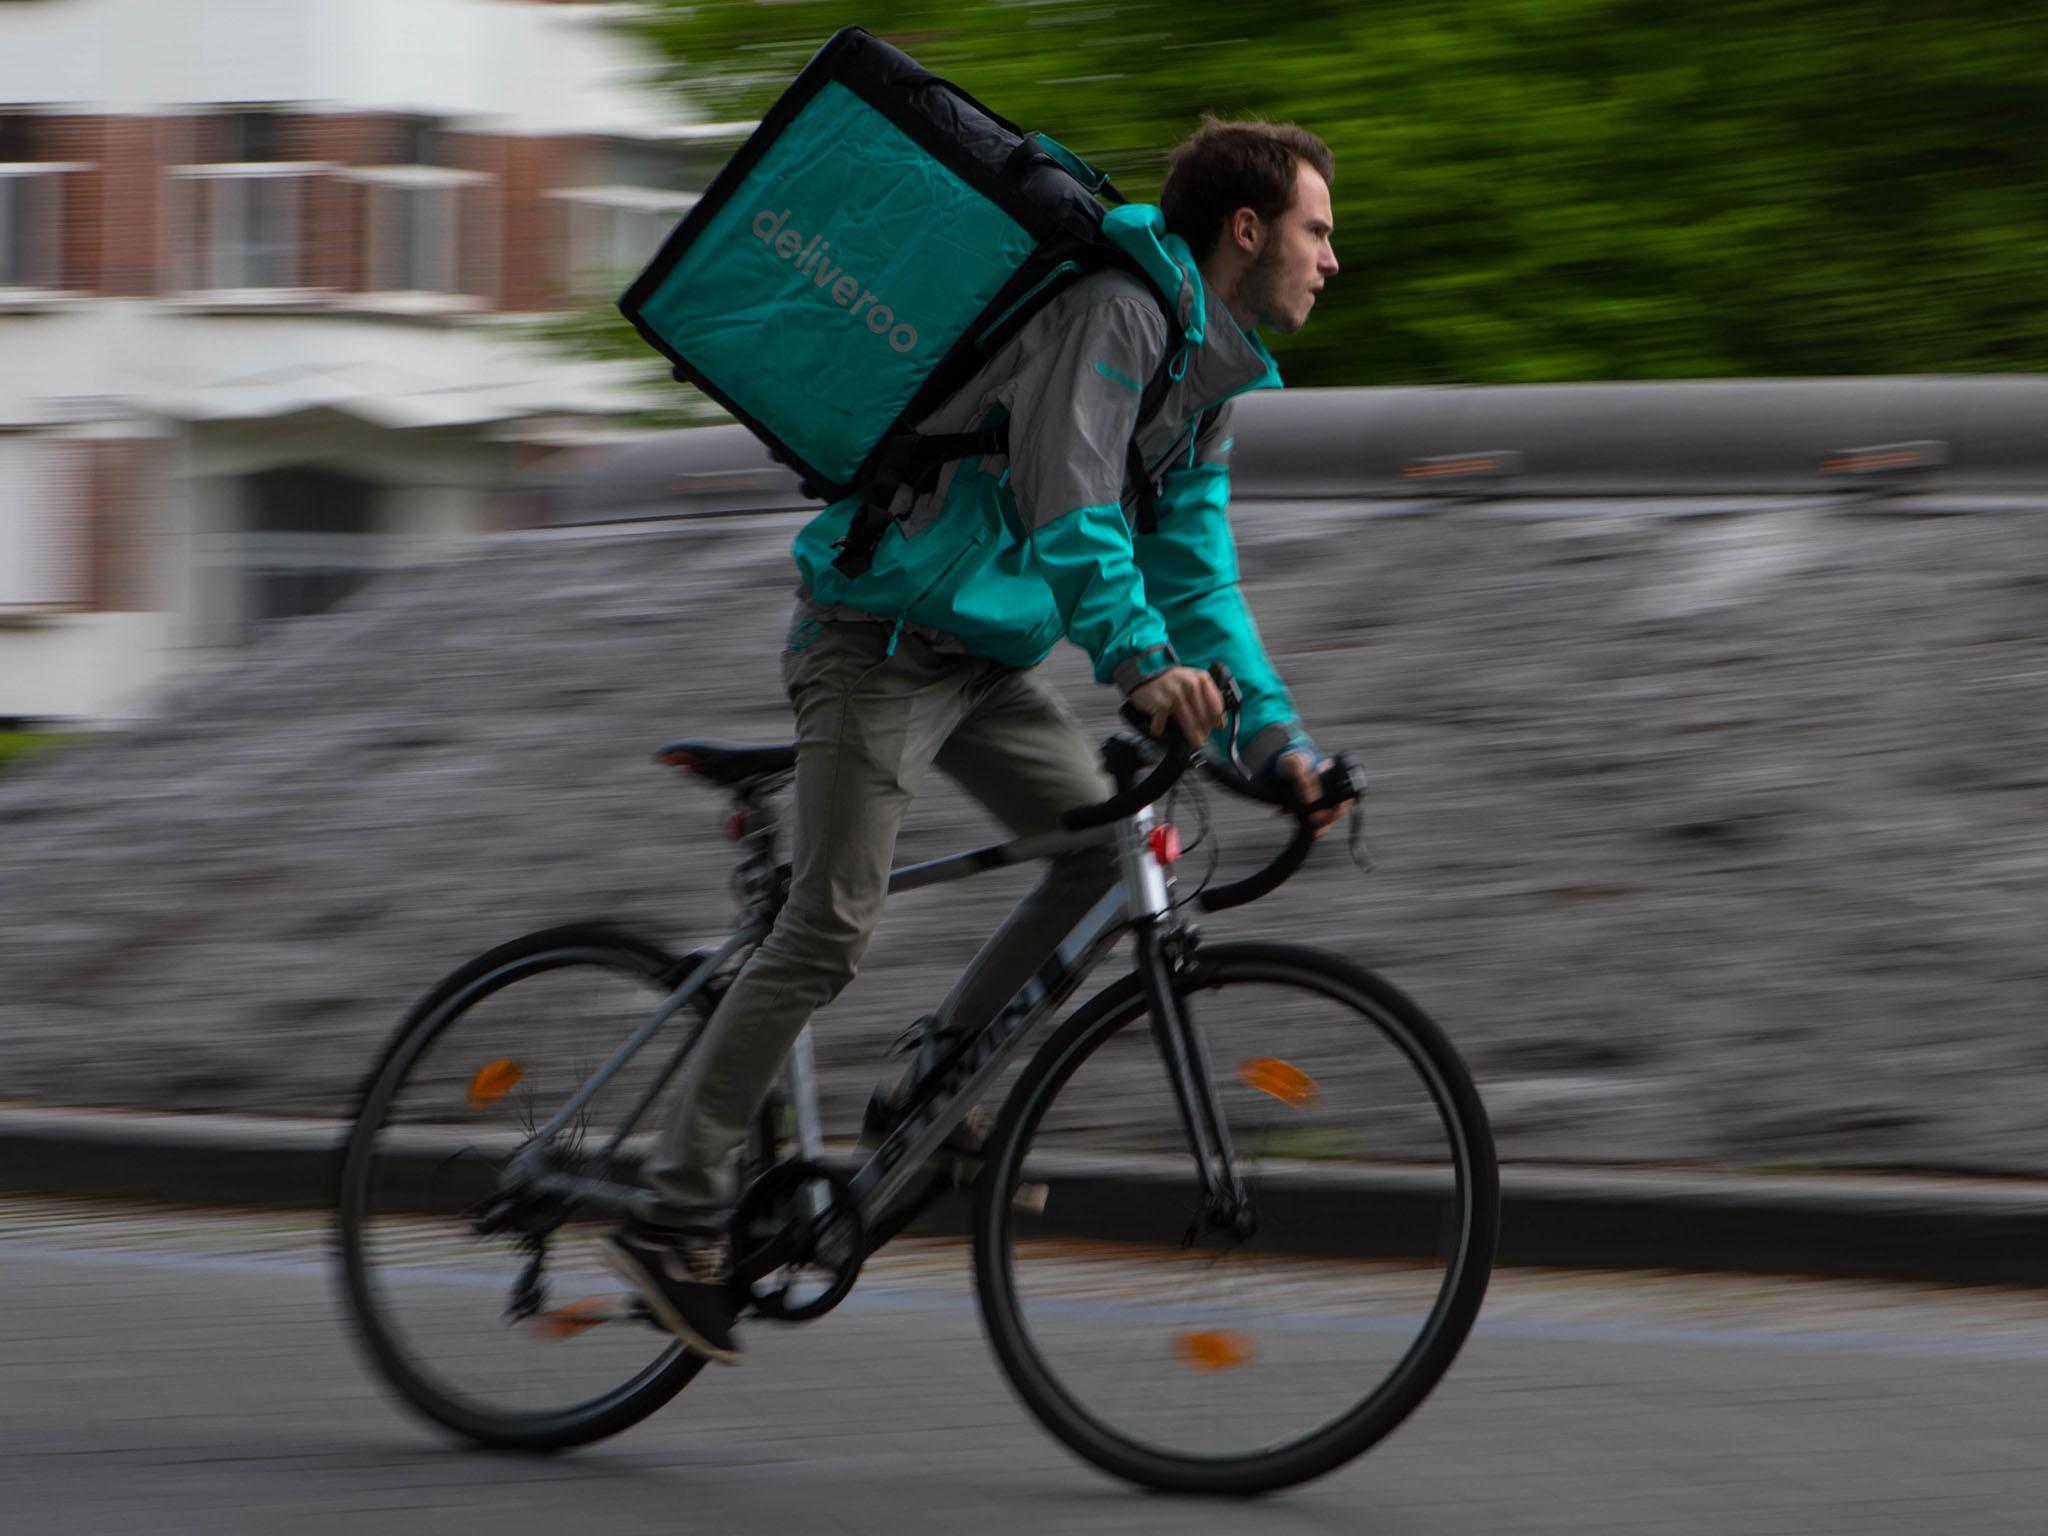 Competition and Markets Authority (CMA) said it had “reasonable grounds for suspecting” that the agreement could “result in Amazon and Deliveroo ceasing to be distinct.”